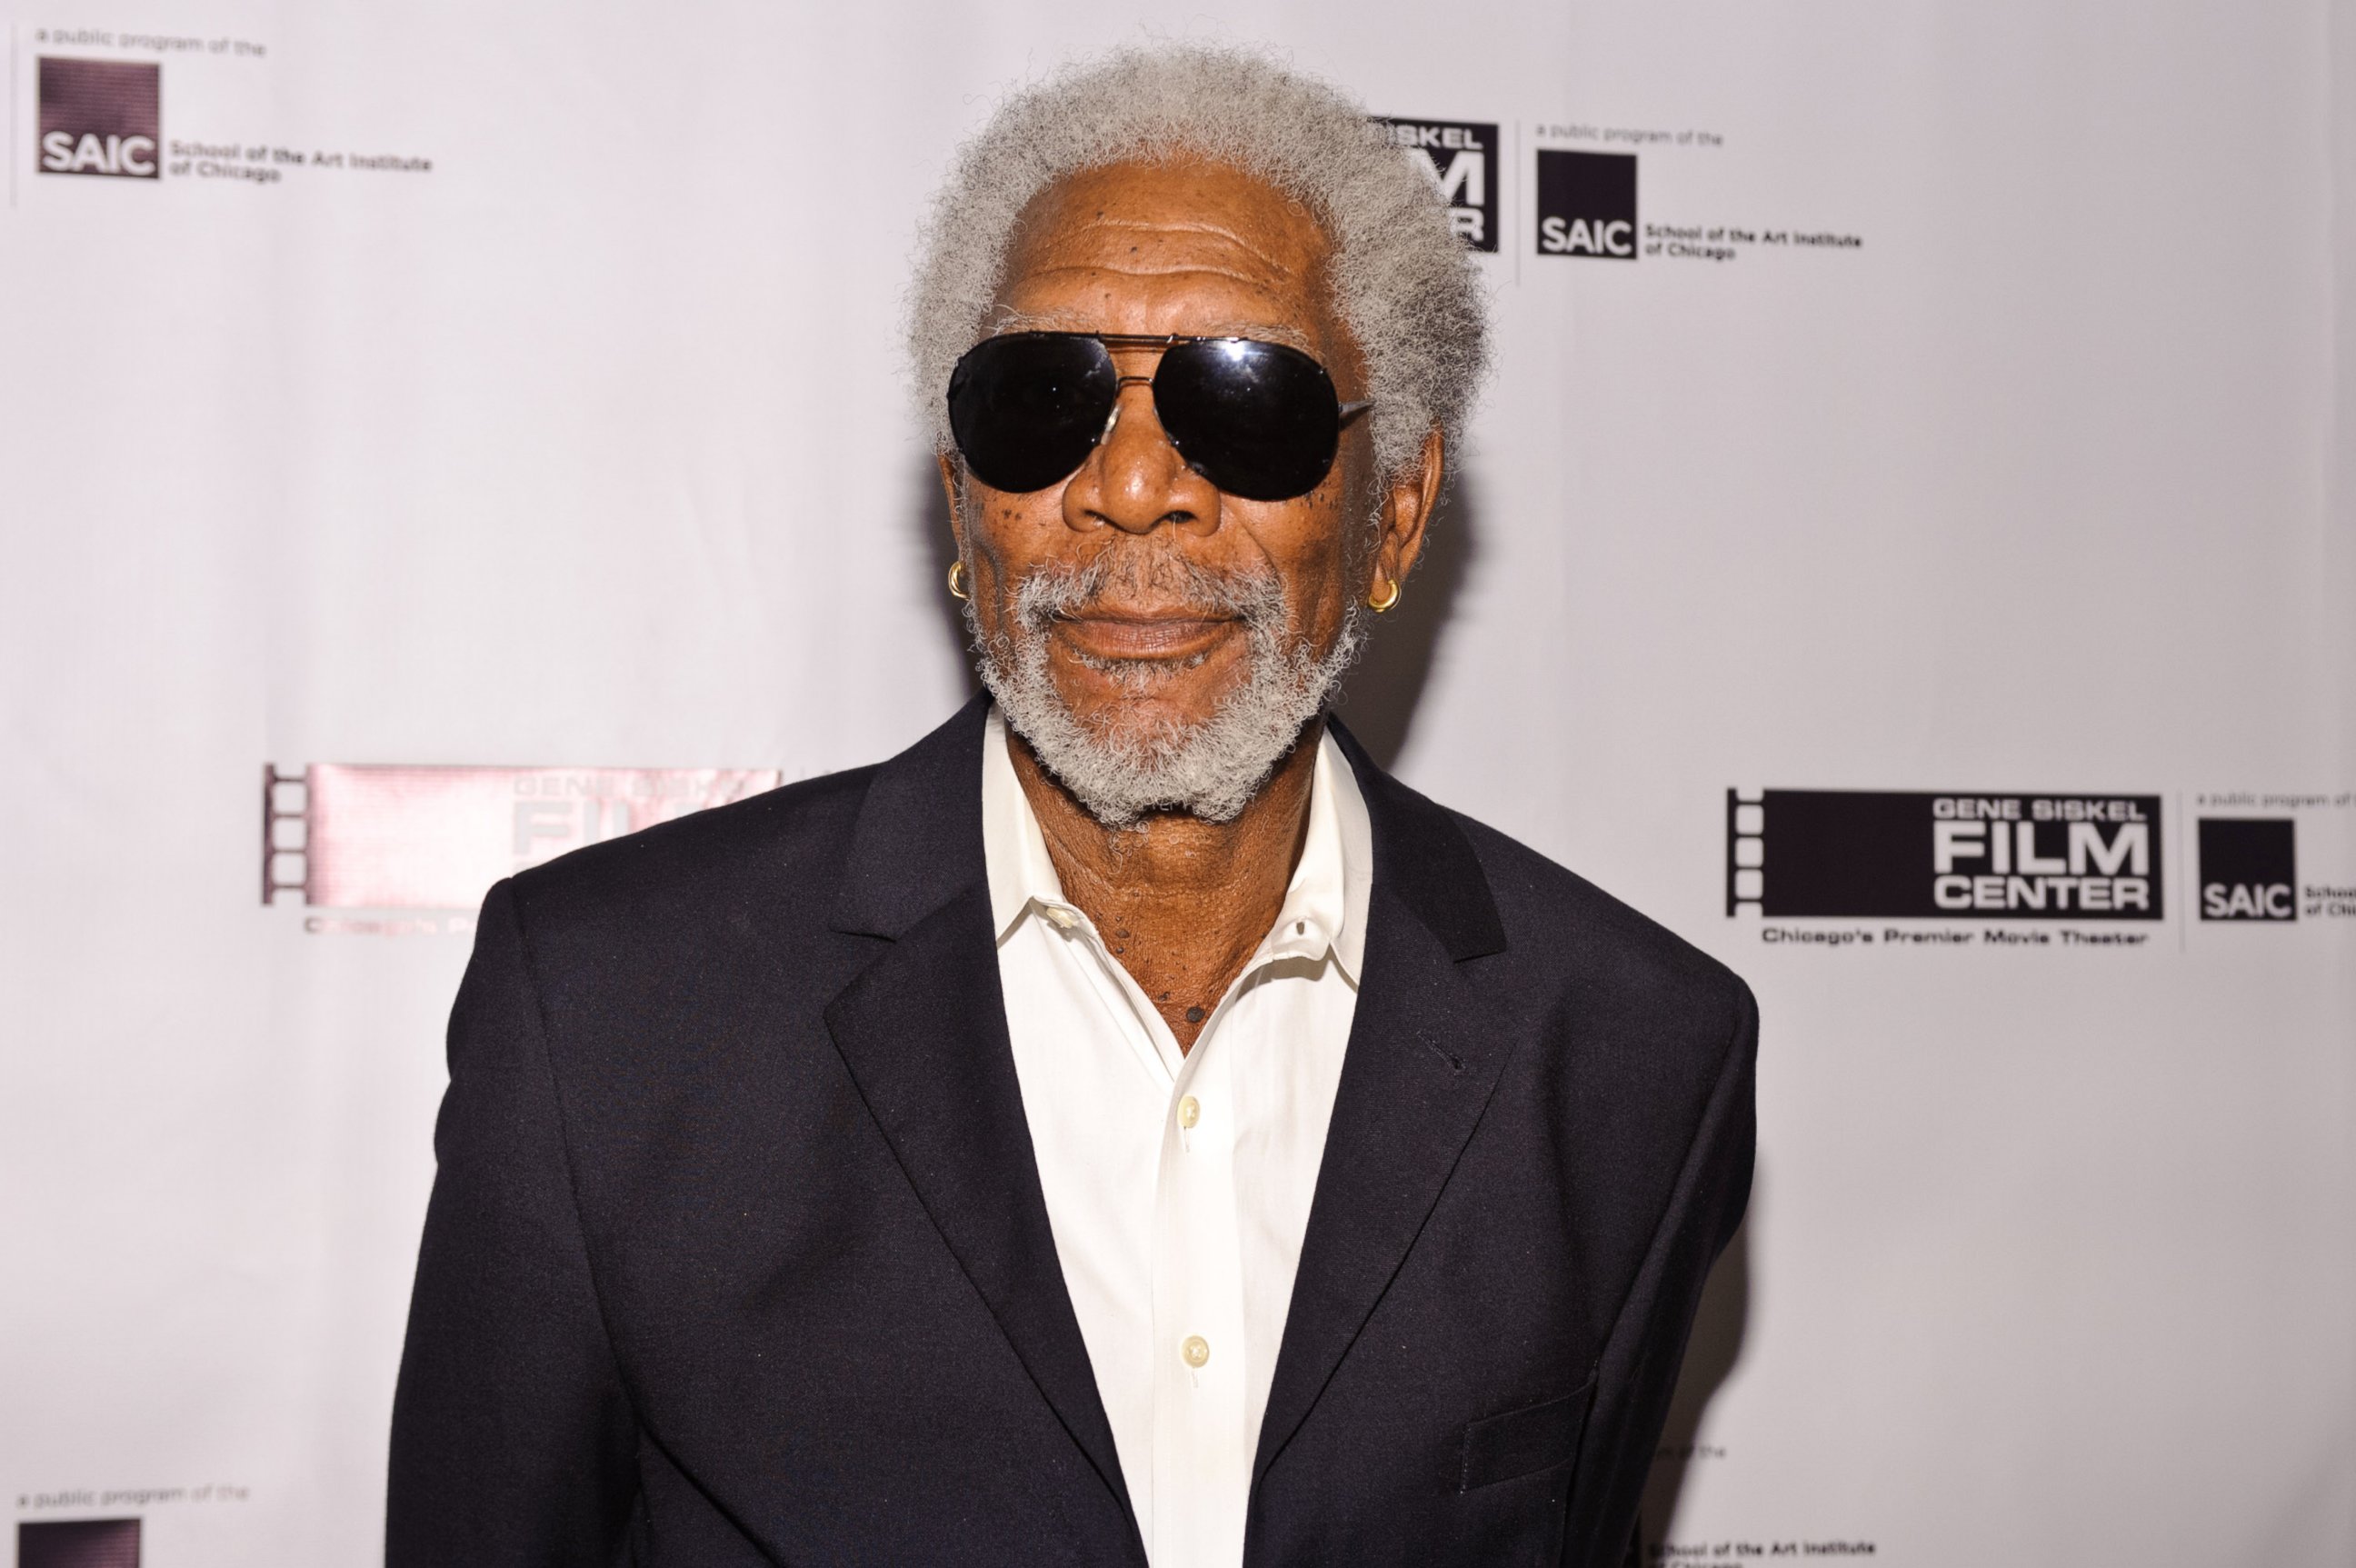 PHOTO: Morgan Freeman is honored by the Gene Siskel Film Center at the Ritz Carlton on June 7, 2014 in Chicago.  